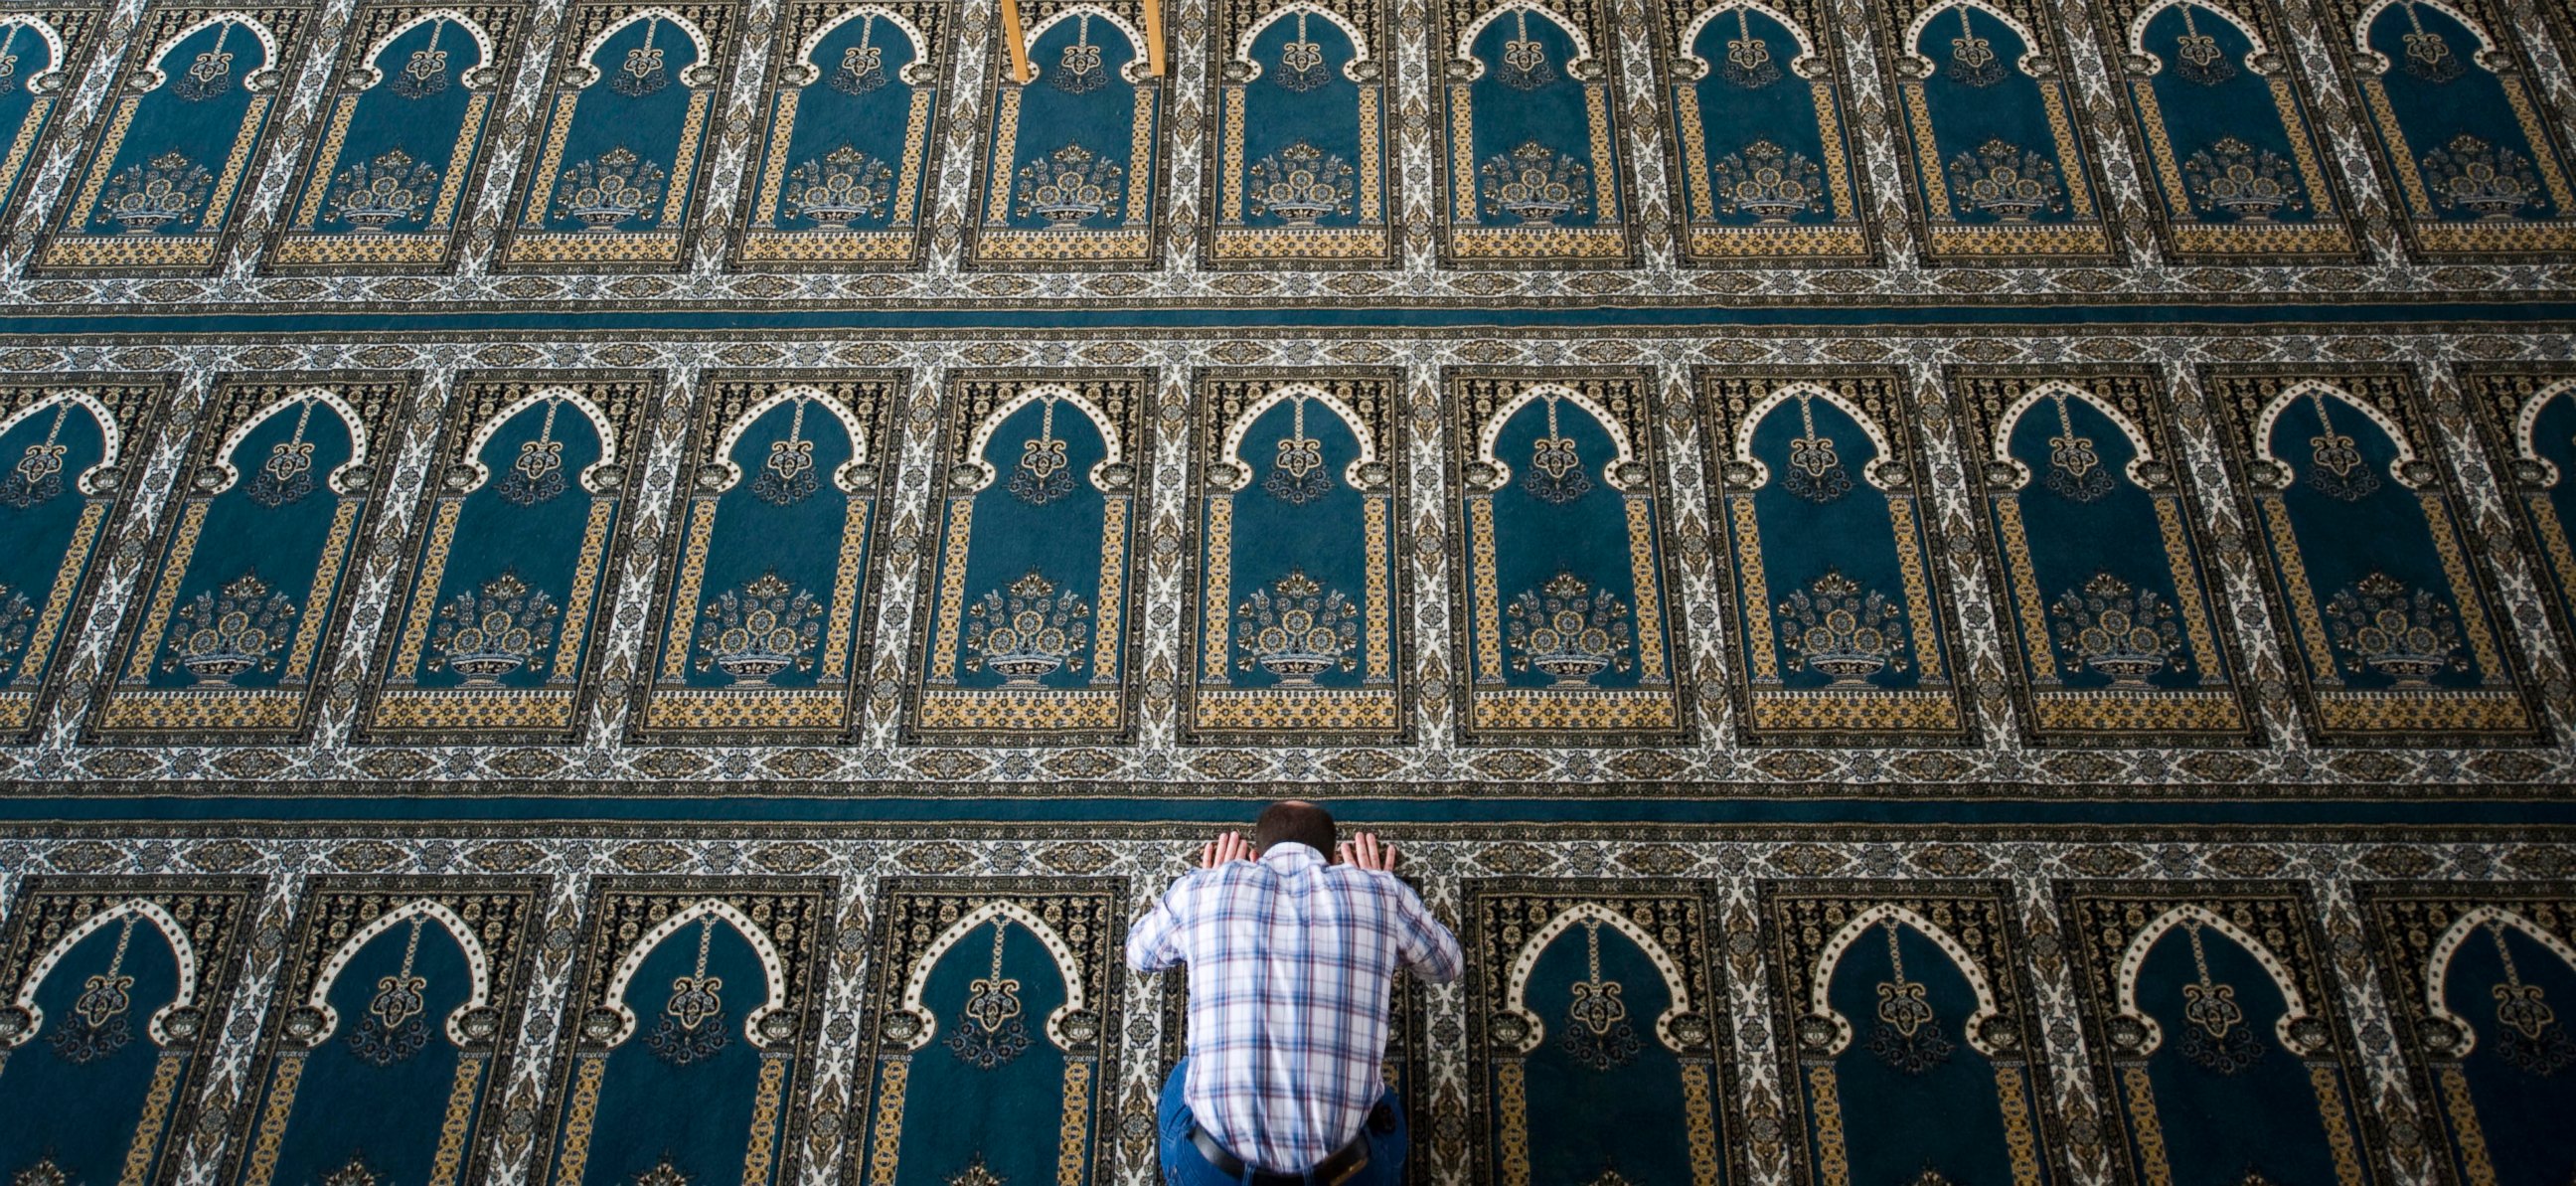 PHOTO: A Muslim worshipper prays in a mosque, October 27, 2010, in the southern Swedish city of Malmoe.